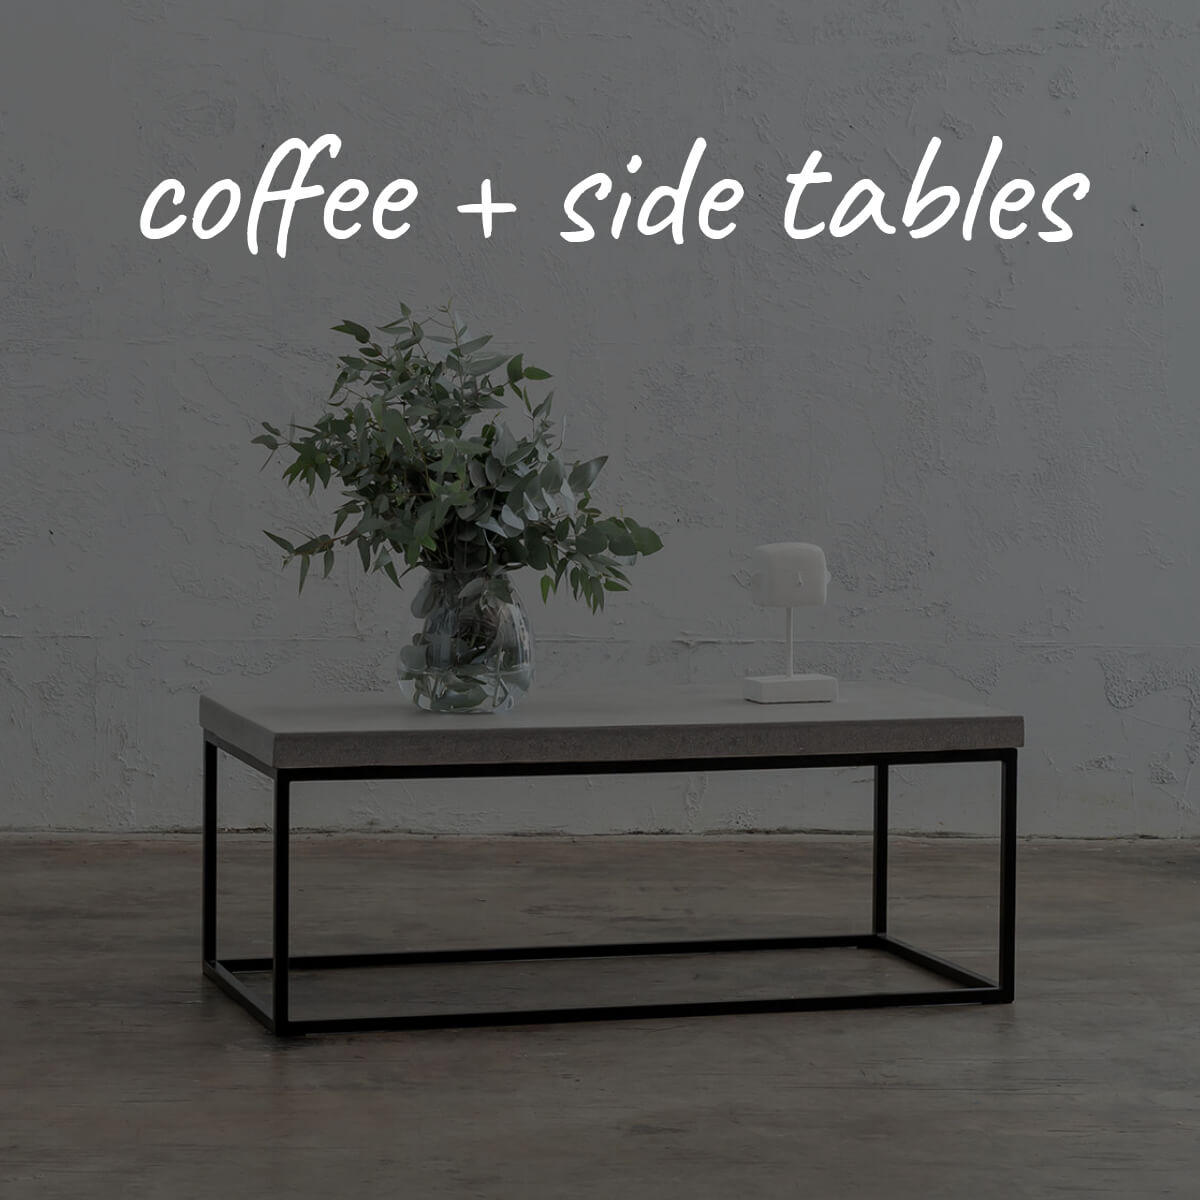 OUTDOOR COFFEE + SIDE TABLES